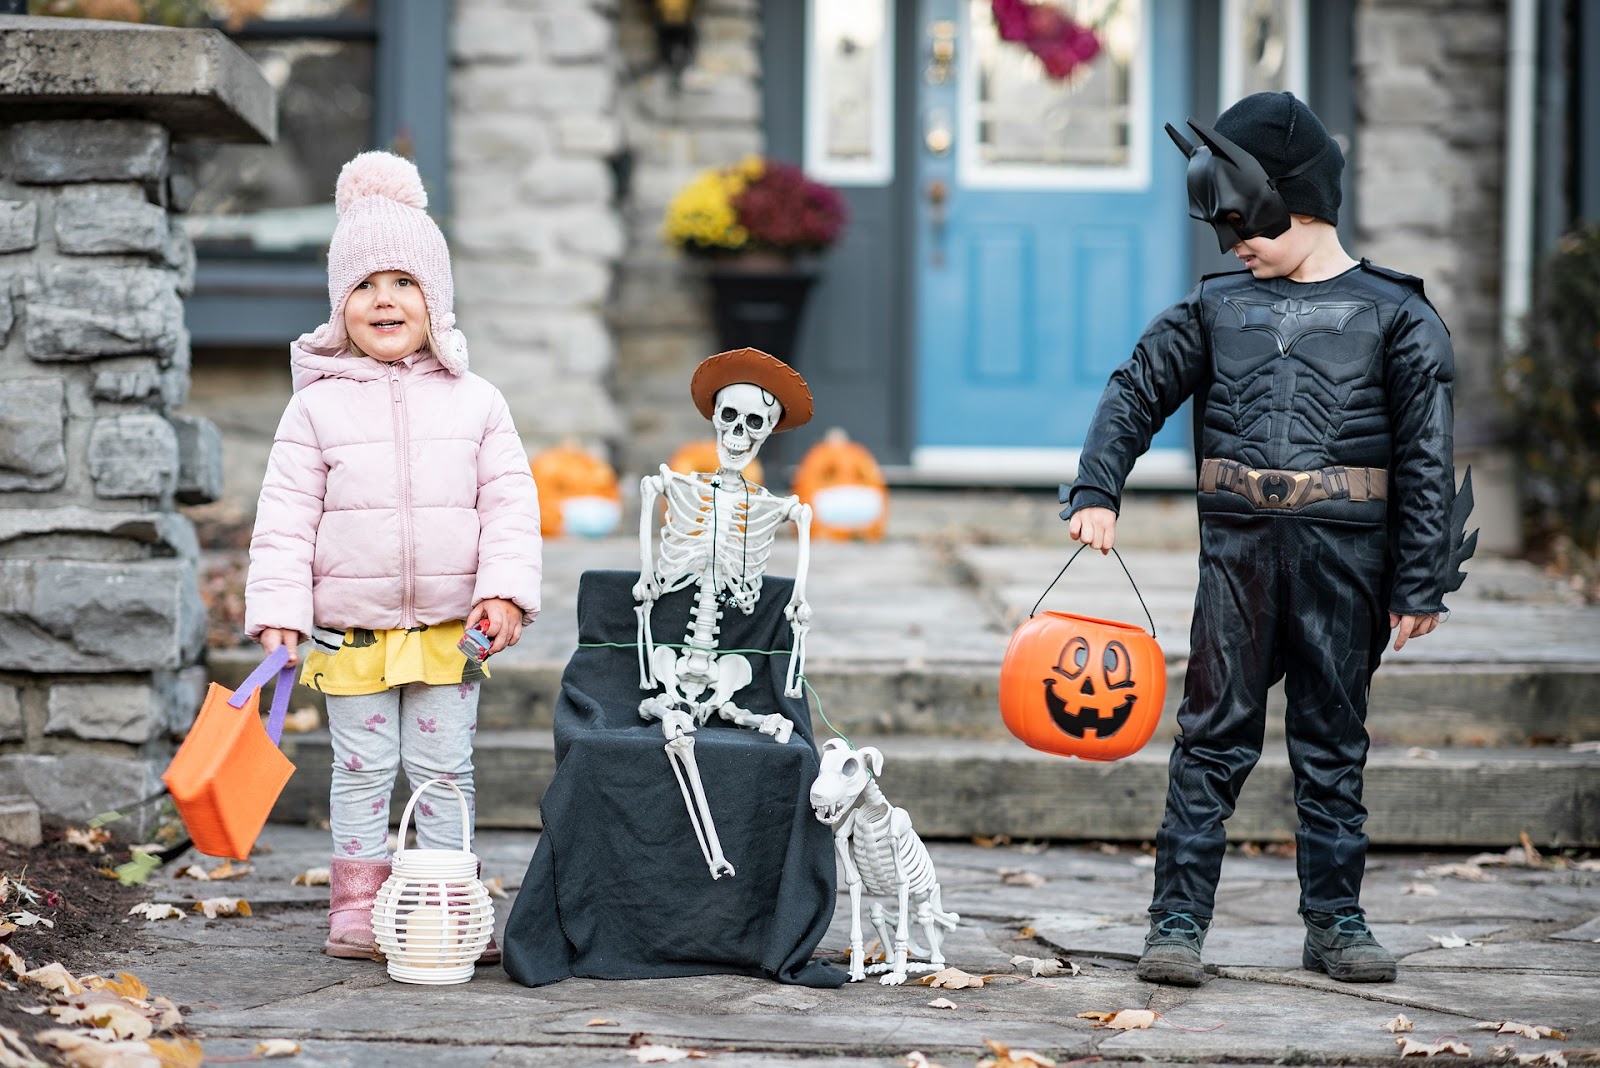 NI Halloween Events that are Fun and Family-Friendly